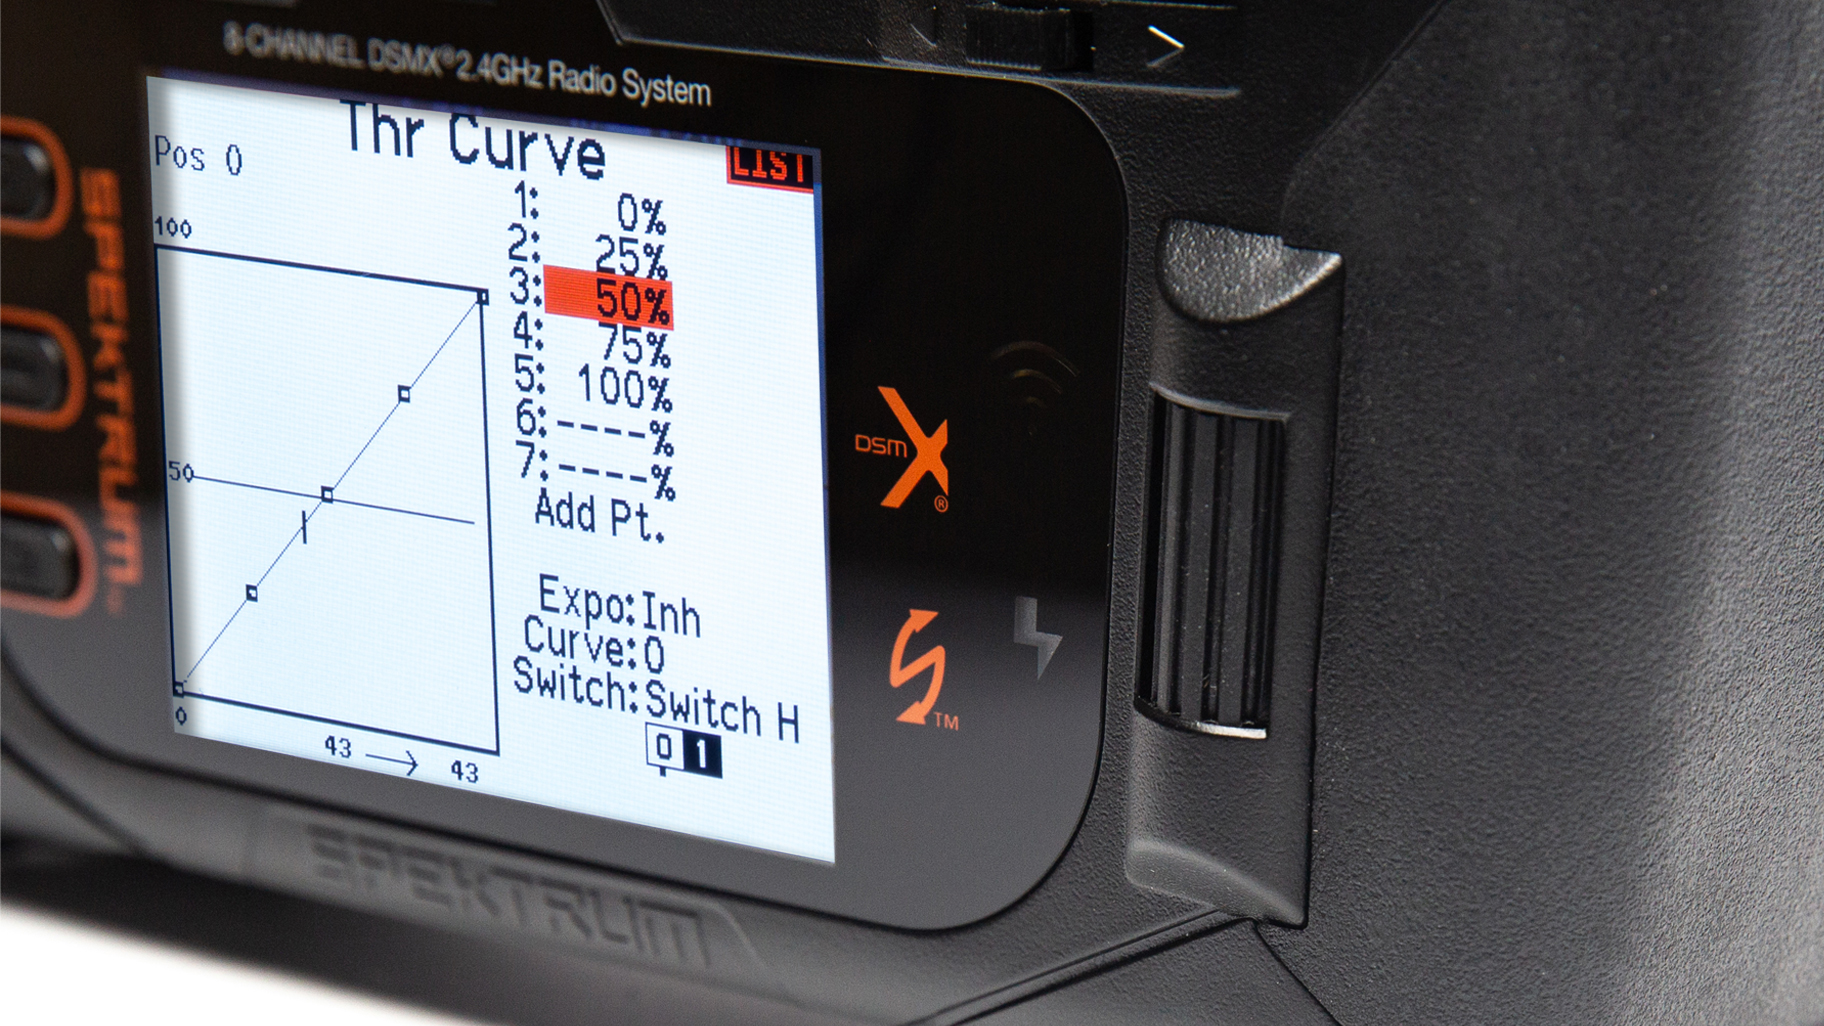 Image of the NX8 Transmitter's roller selector and light backlit screen